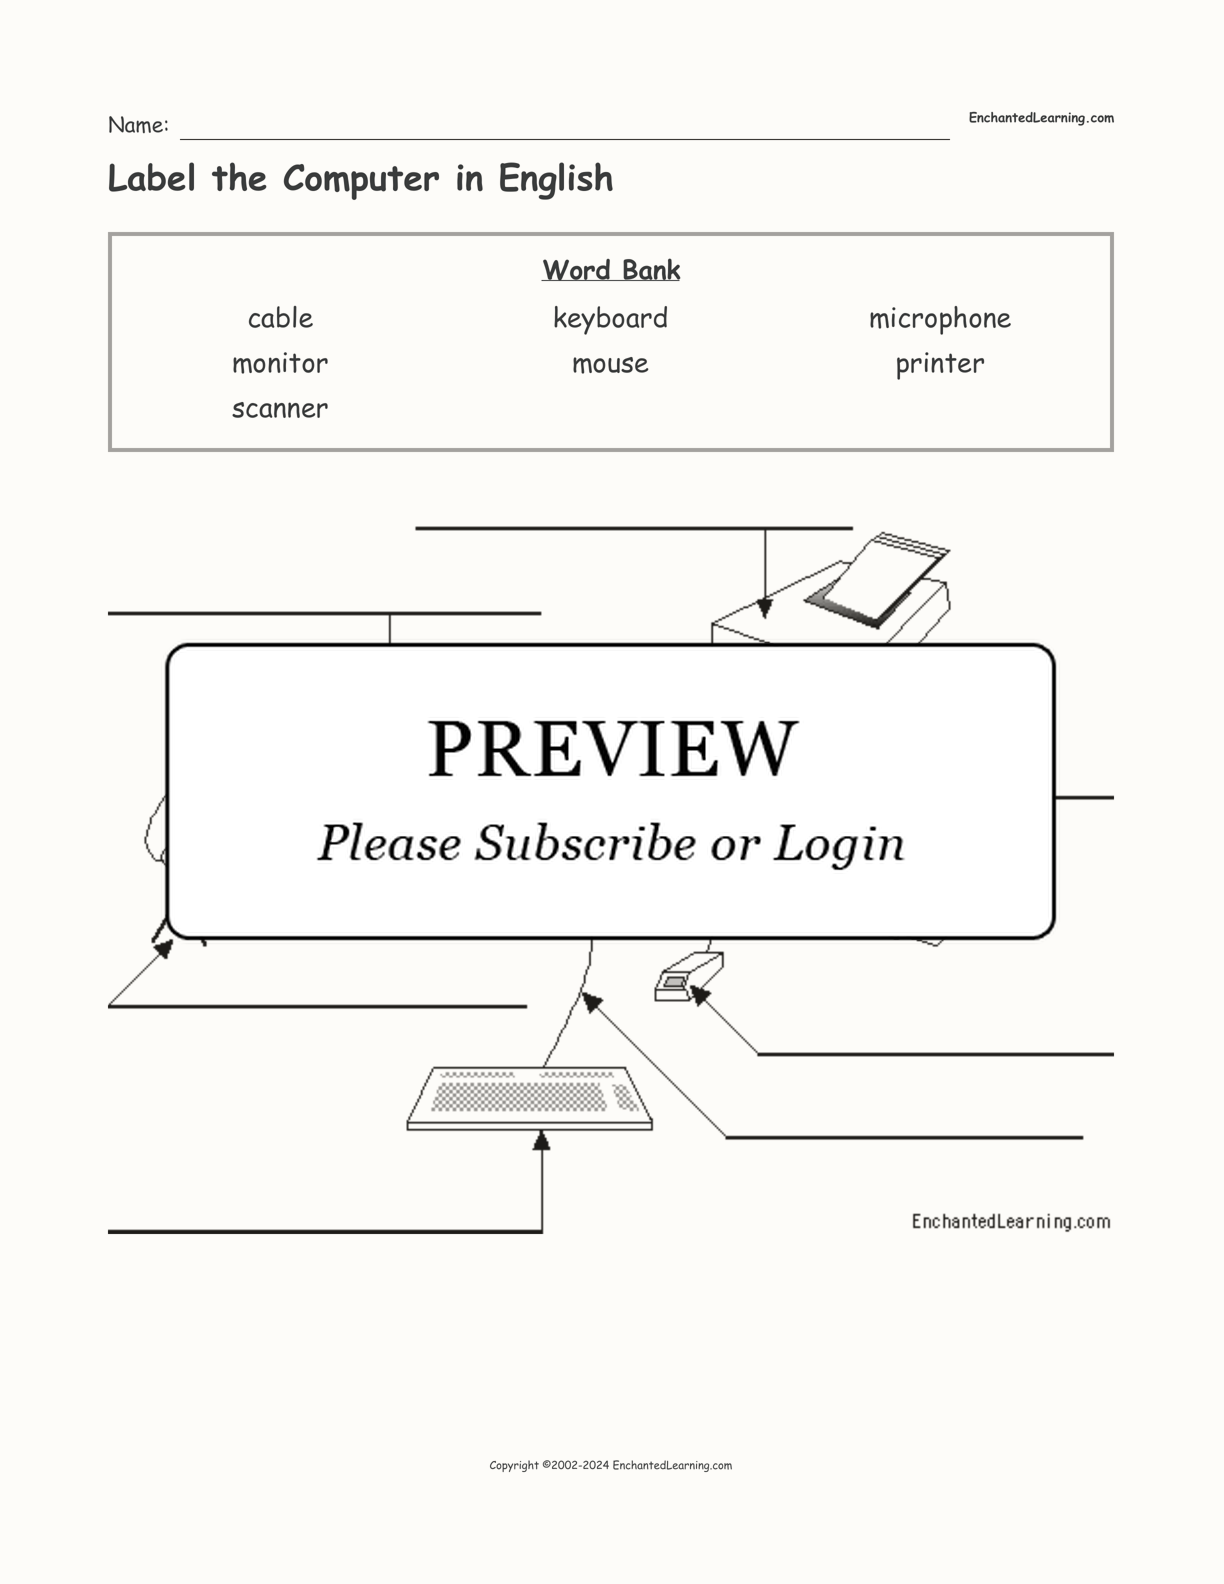 Label the Computer in English interactive worksheet page 1